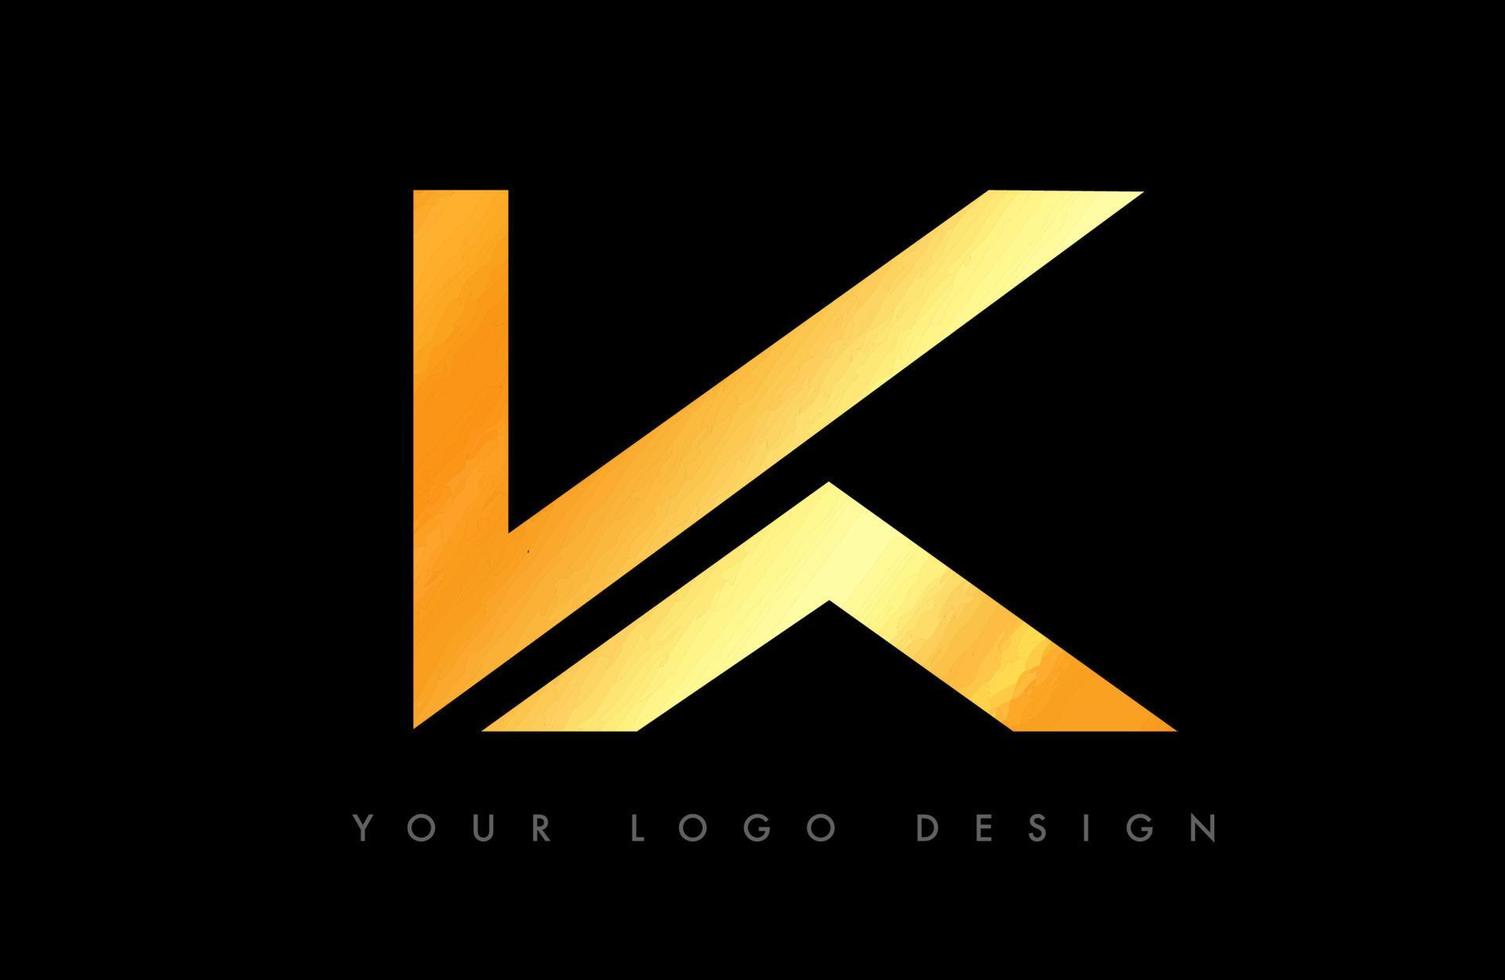 KA AK Letter Concept Logo. K letter Icon Vector with Creative Shape and Minimalist Design in Golden